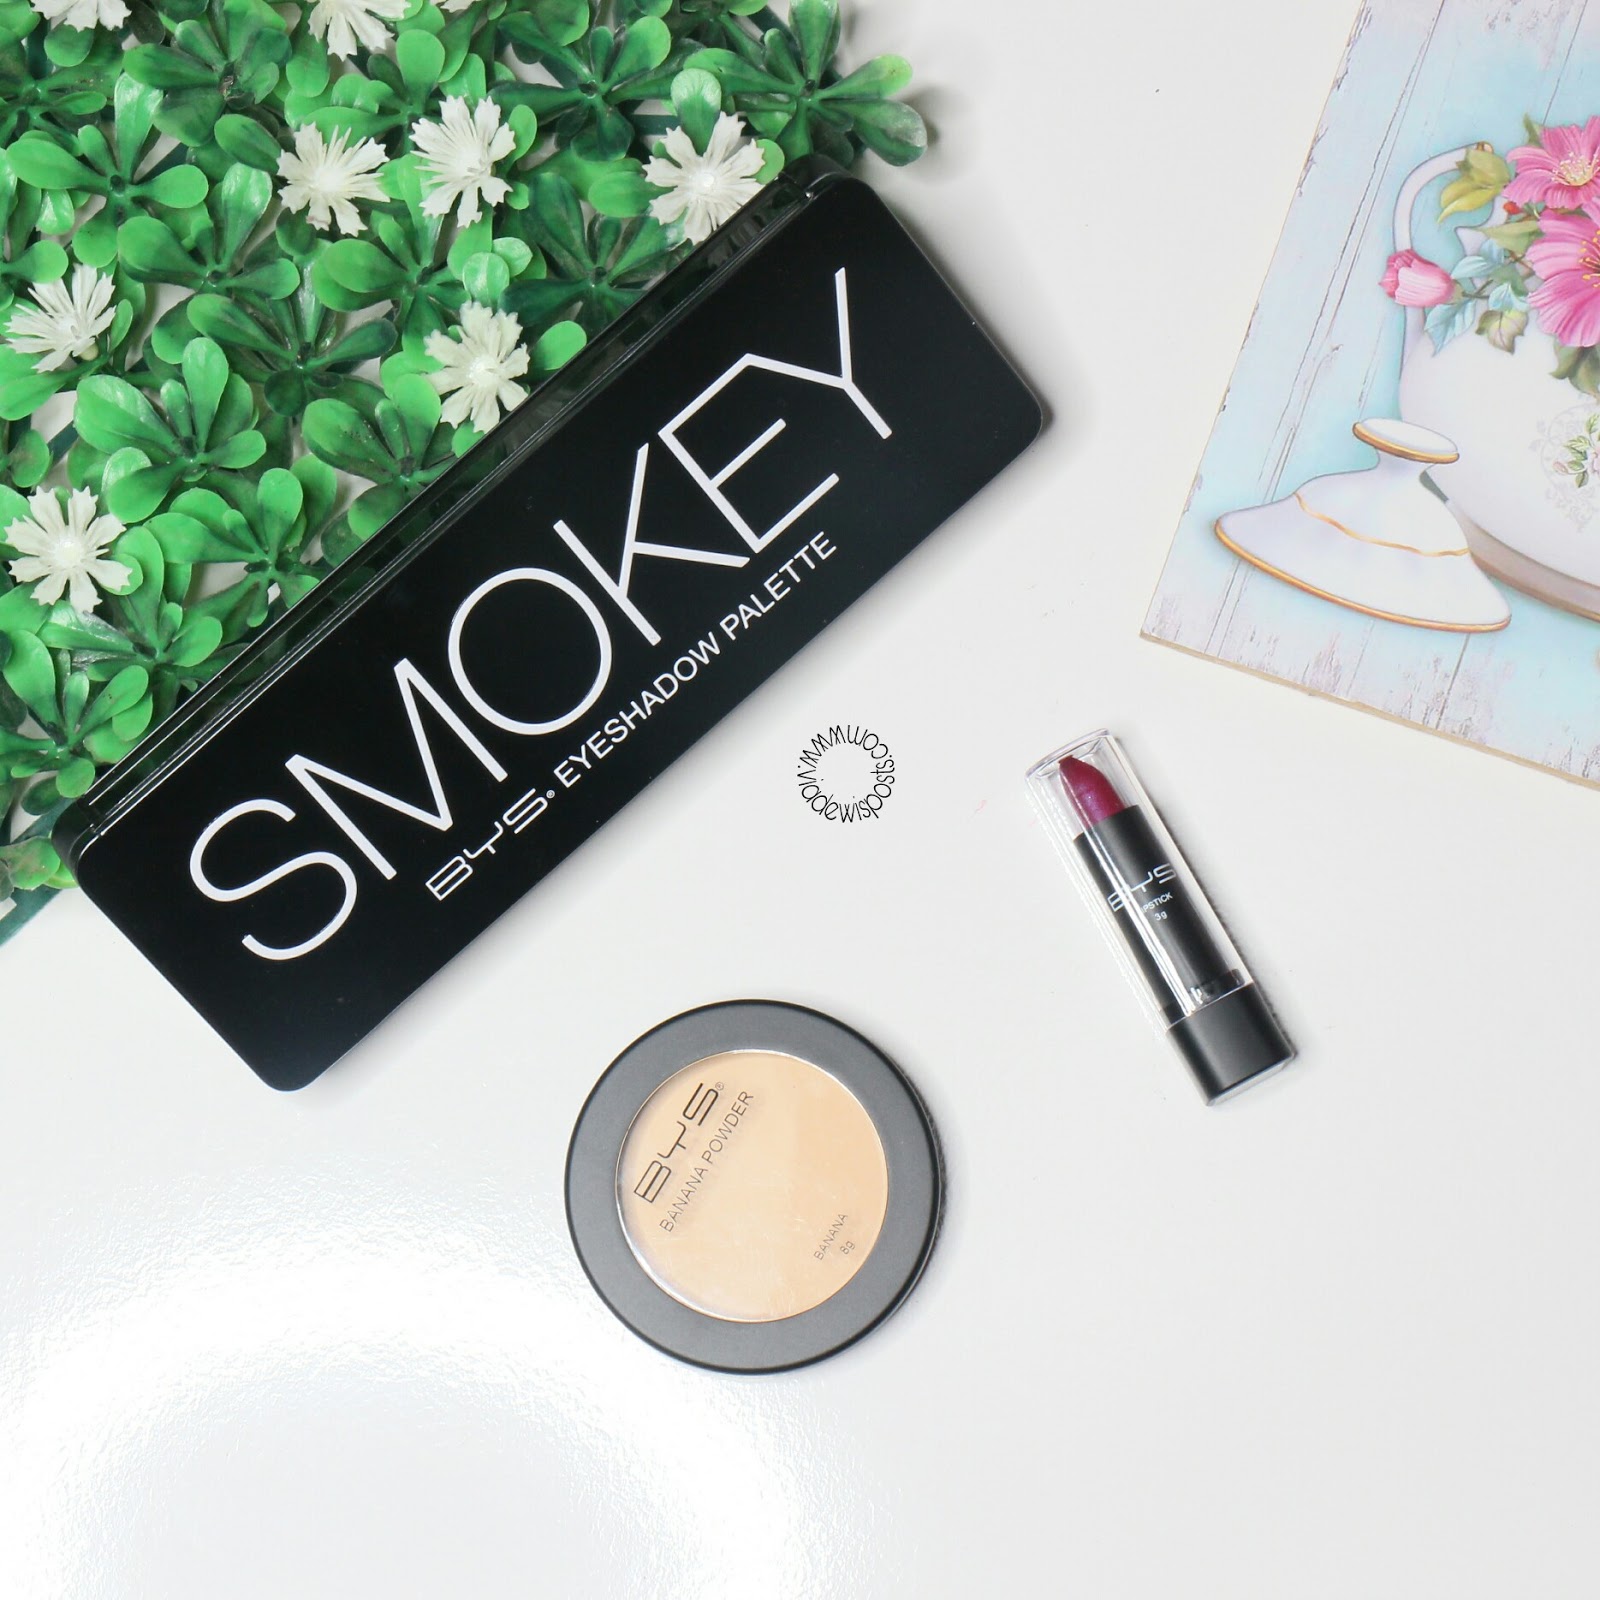 REVIEW SWATCHES BYS SMOKEY EYESHADOW PALETTE DUPE NAKED